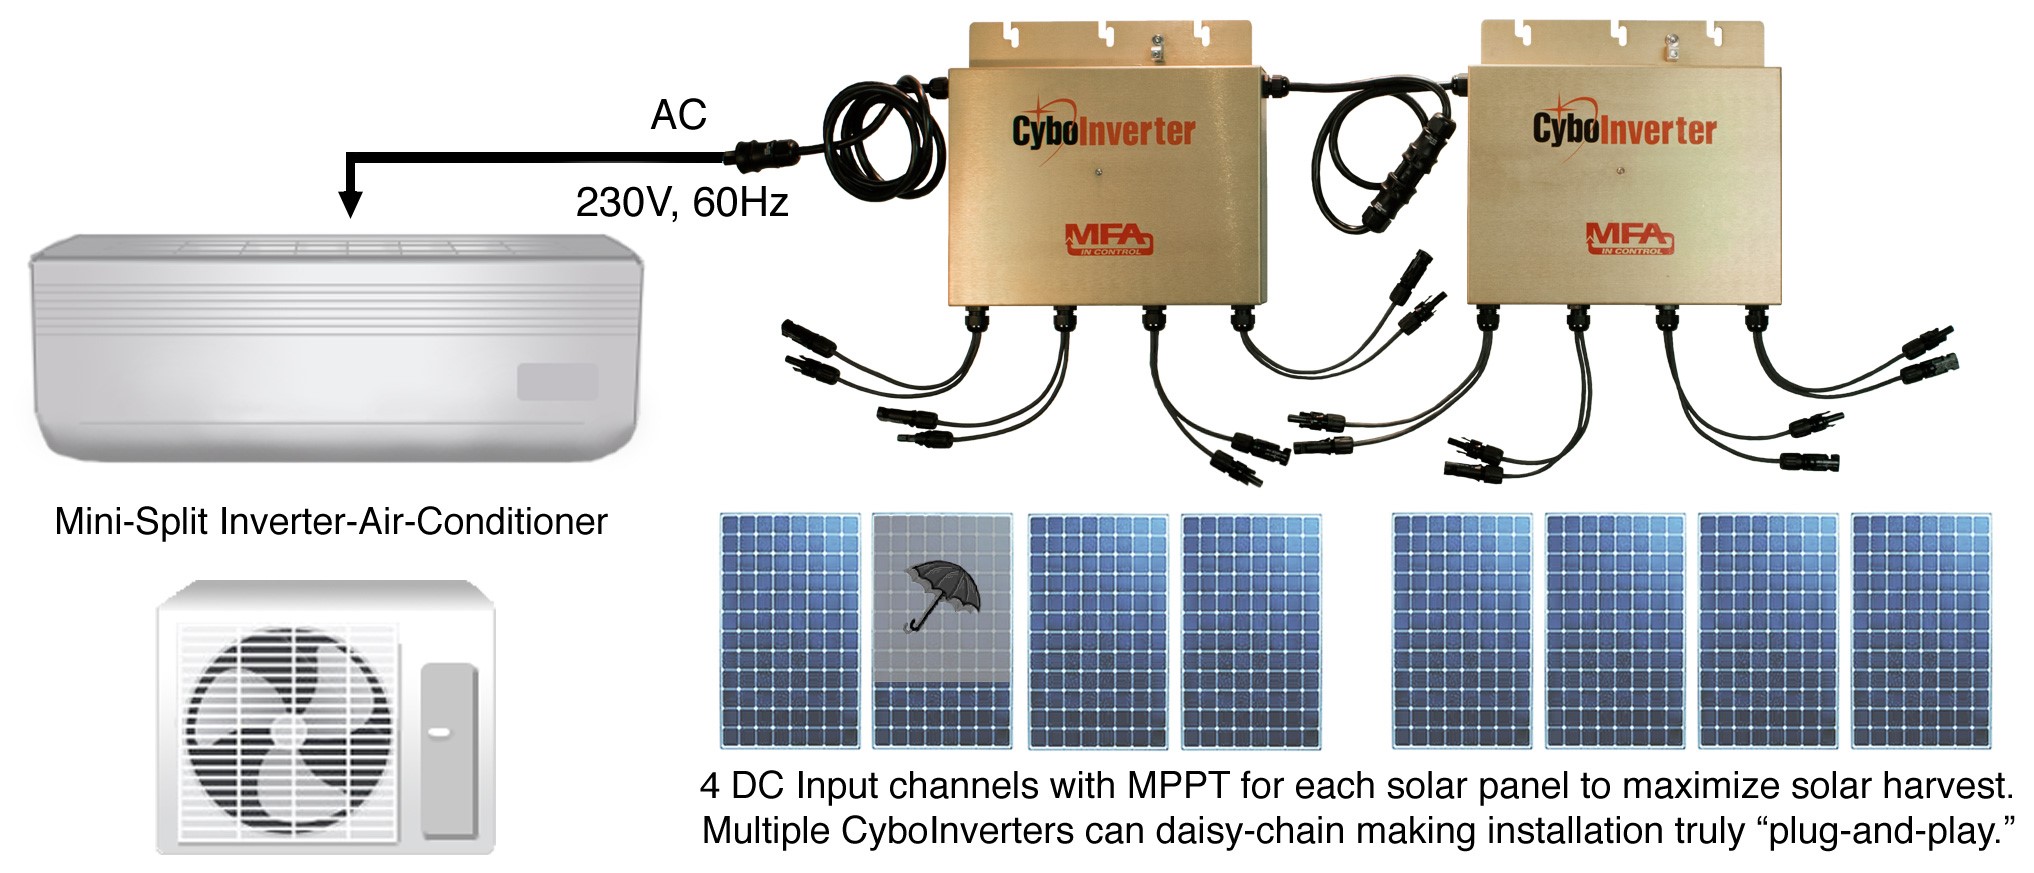 CyboEnergy offers on-grid off-grid and onoff CyboInverter solar inverters